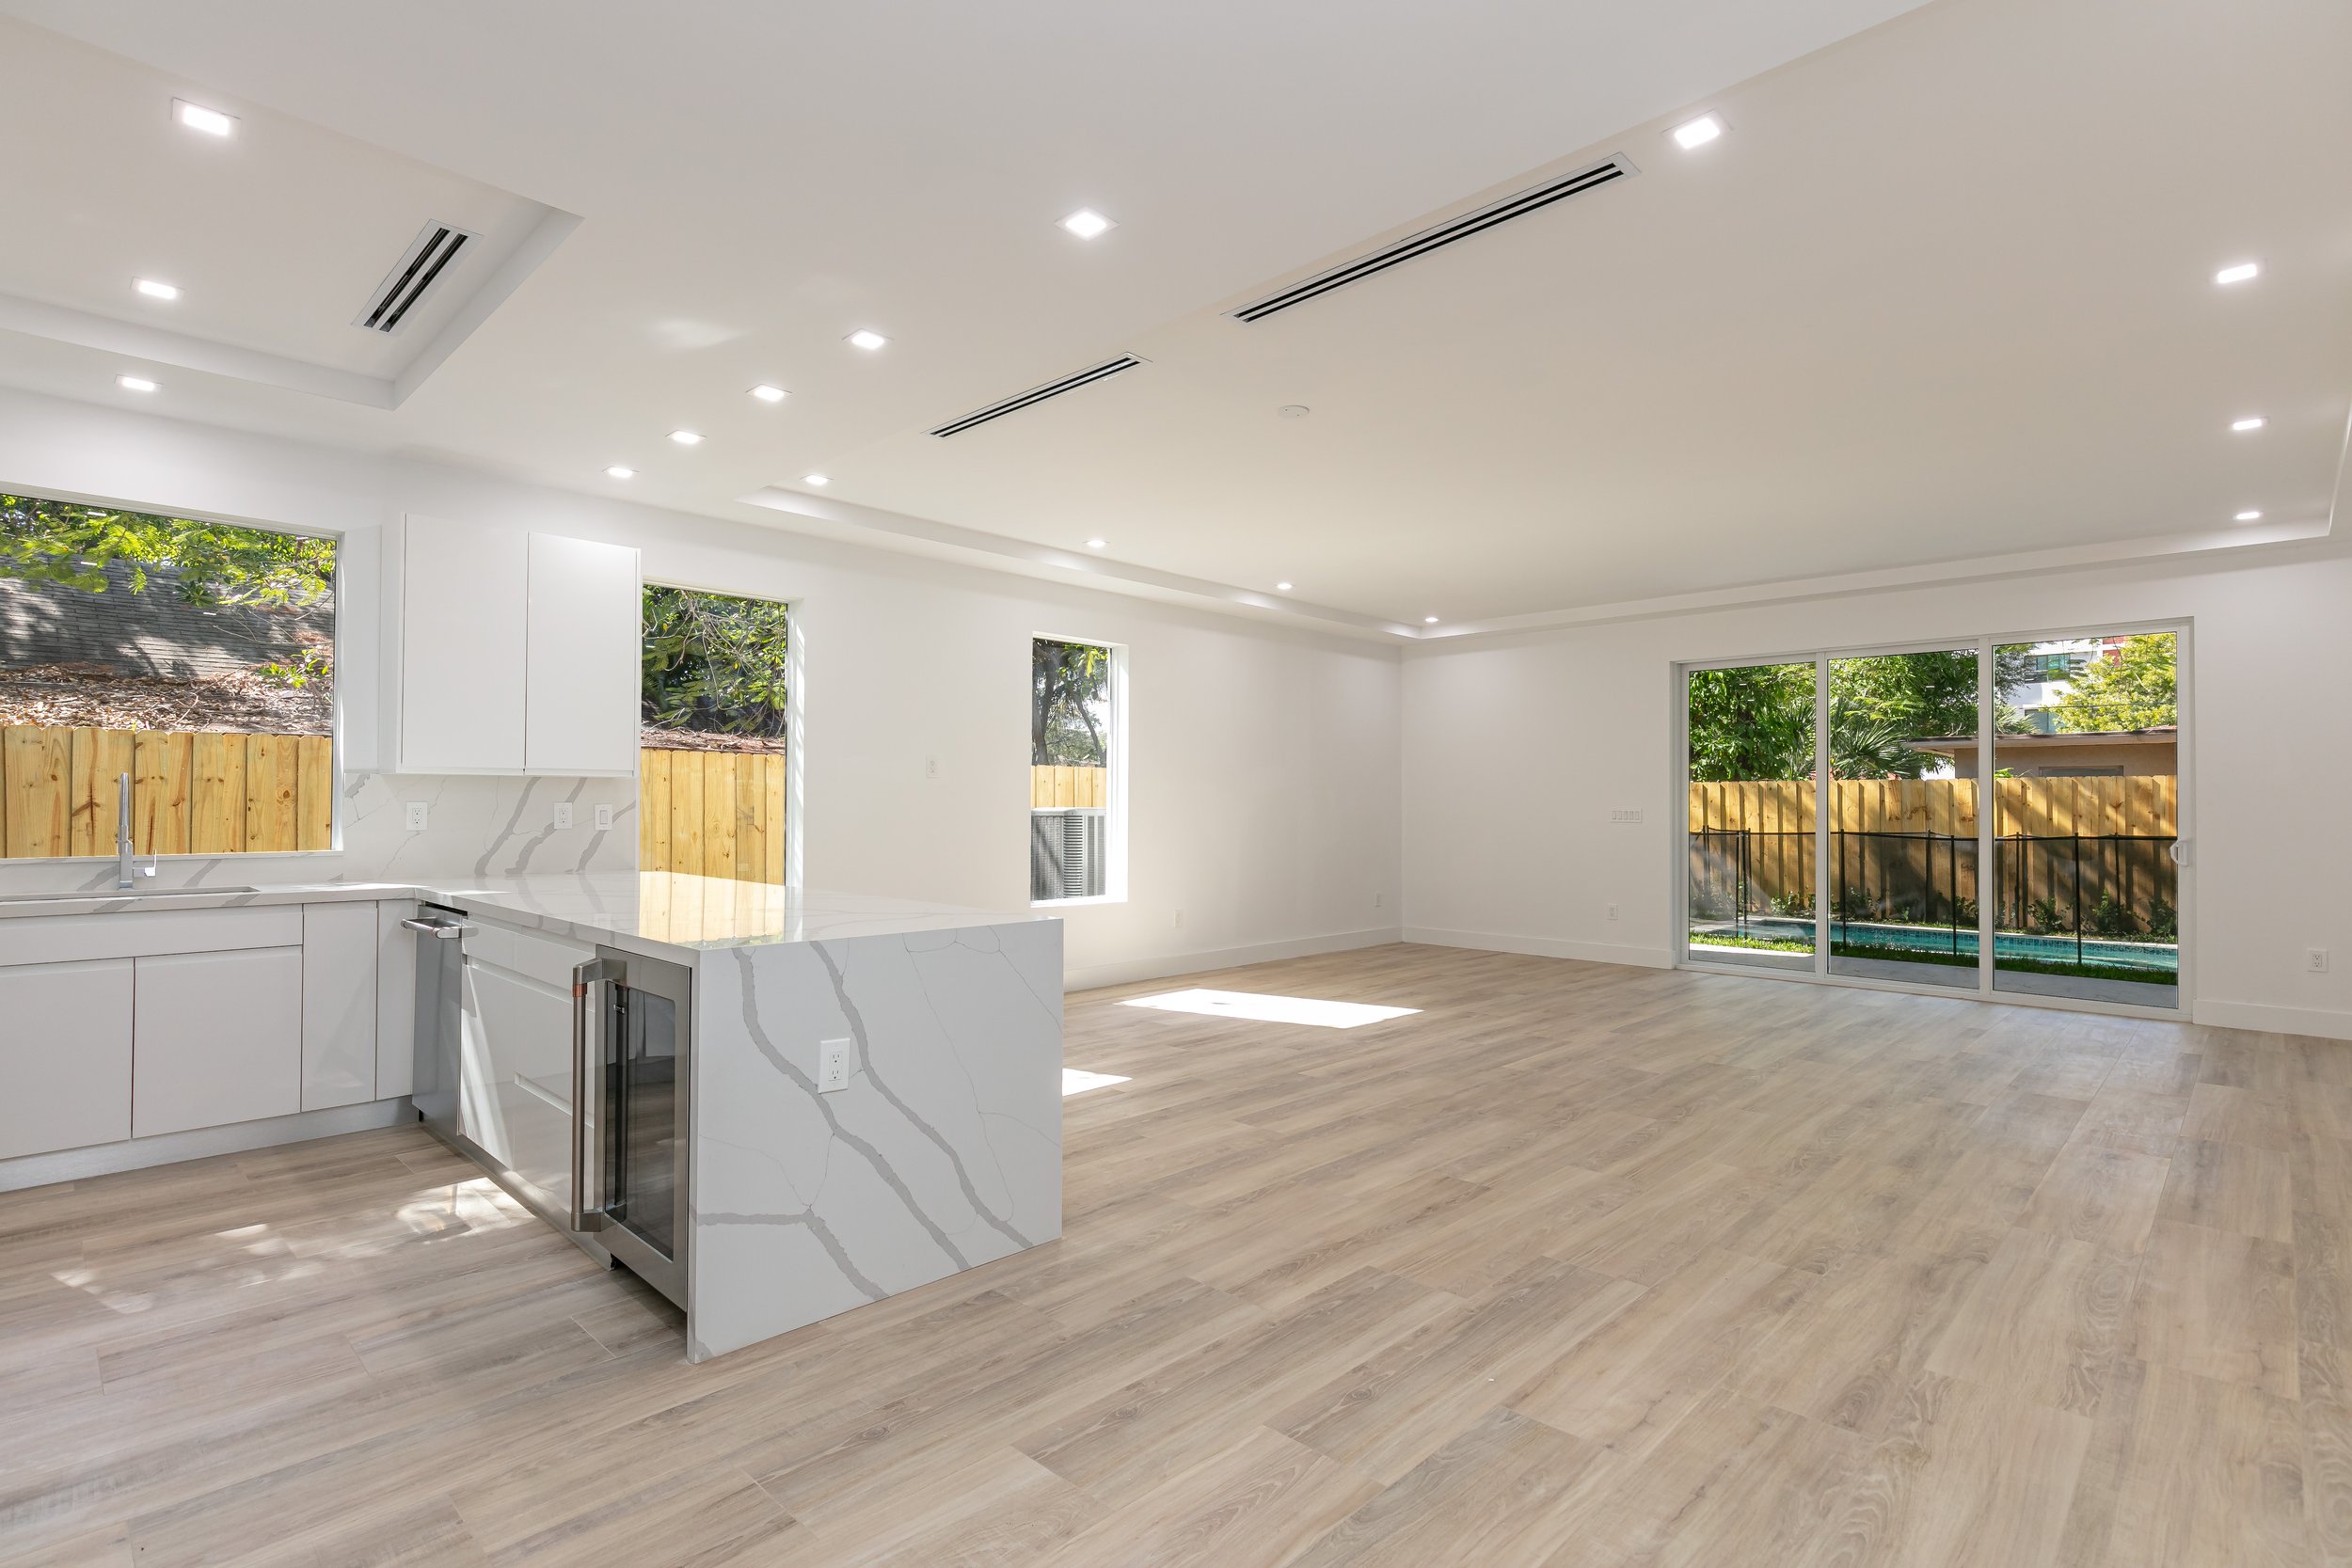 ALTARA Properties Launches Sales Of Newly Completed Casa Azzura Luxury Townhomes In Coconut Grove 31.jpg